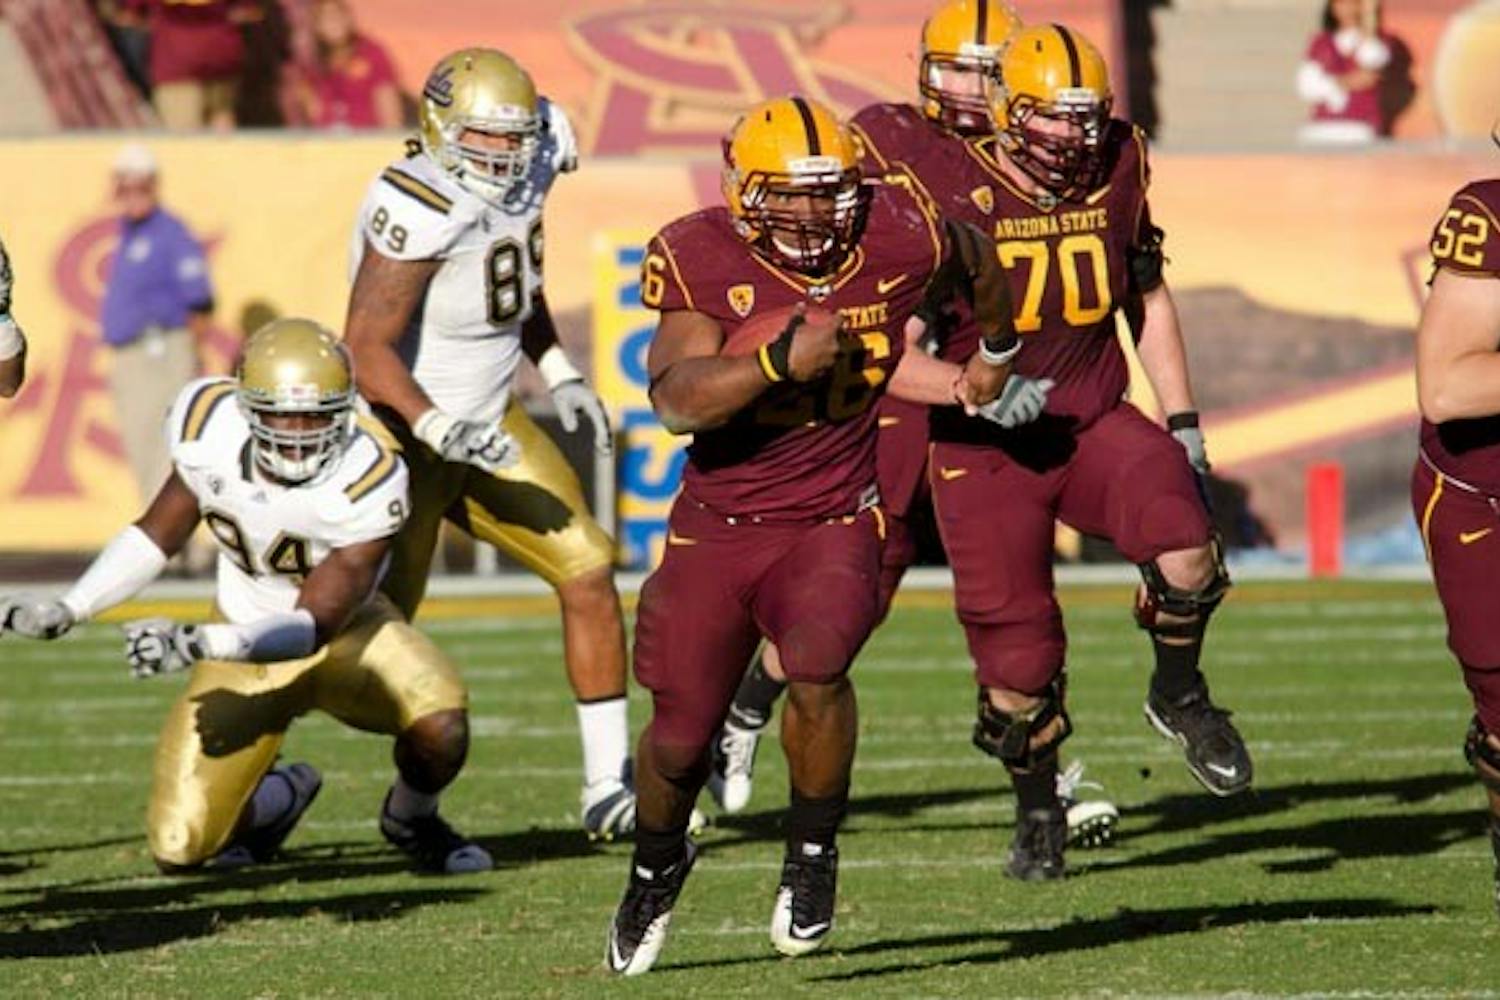 CHARGING FORWARD: Sophomore running back Cameron Marshall sprints downfield during Saturday's 55-34 ASU win over UCLA. Marshall finished the game with a touchdown and 148 yards on 17 carries, including a 71-yard touchdown run. (Photo by Aaron Lavinsky)